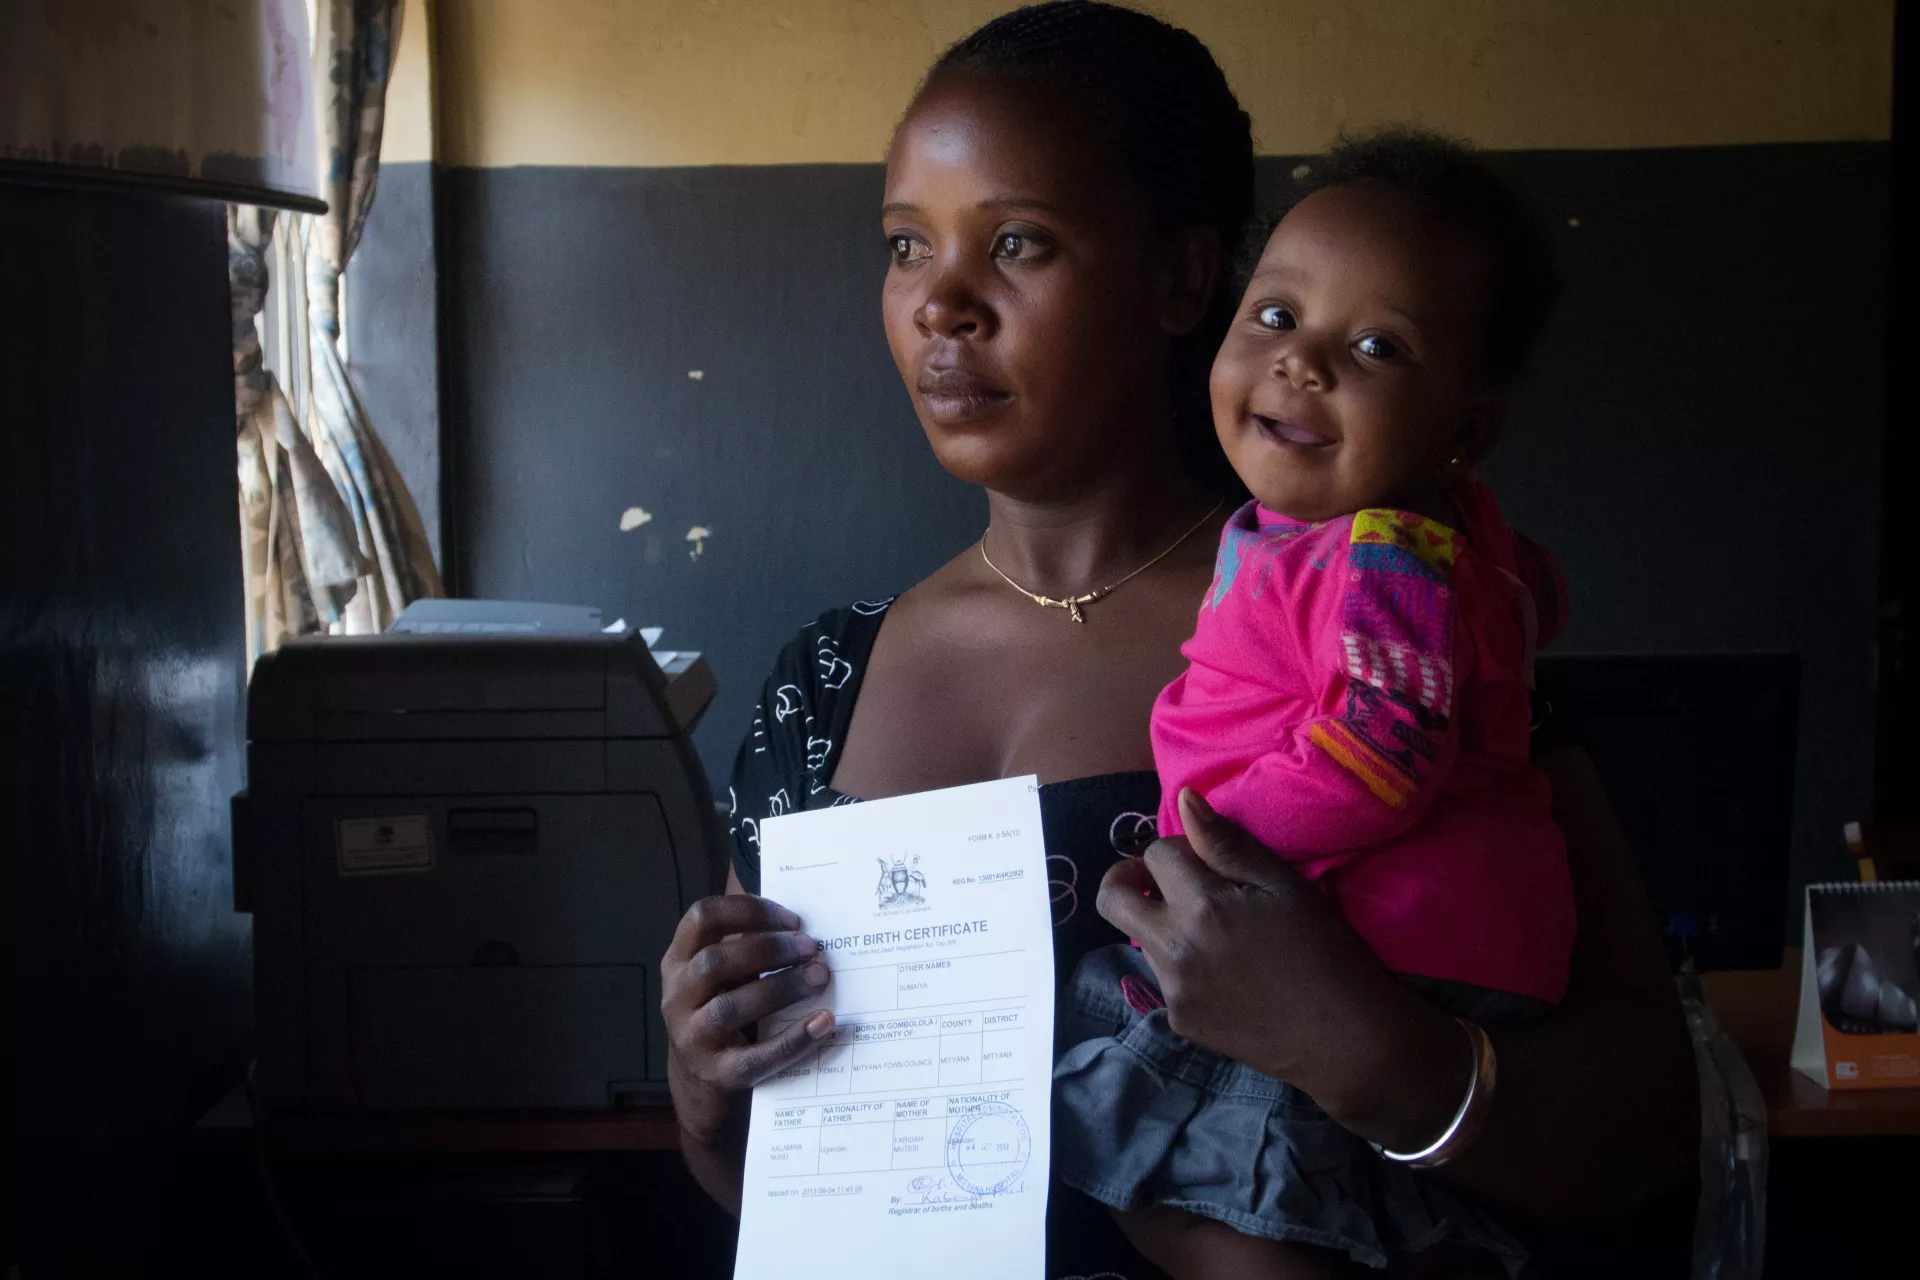 A mother displays her child's birth certificate while holding her child in a hospital in Uganda.